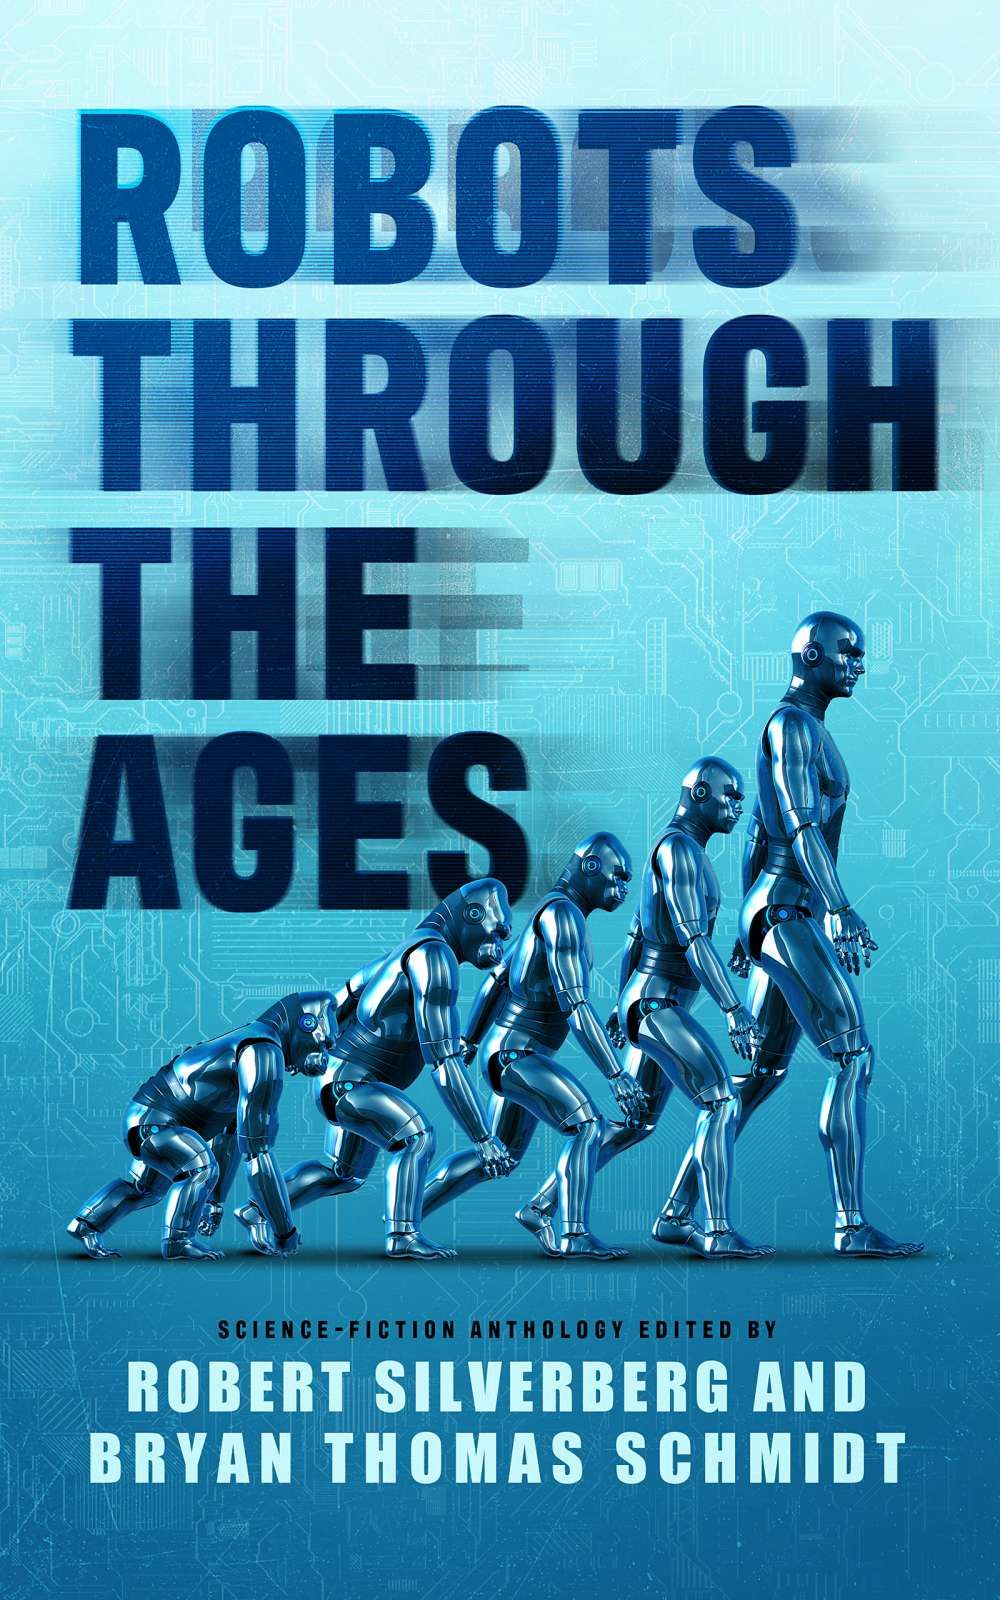 “Robots through the Ages”, an anthology by Robert Silverberg & Bryan Thomas Schmidt 